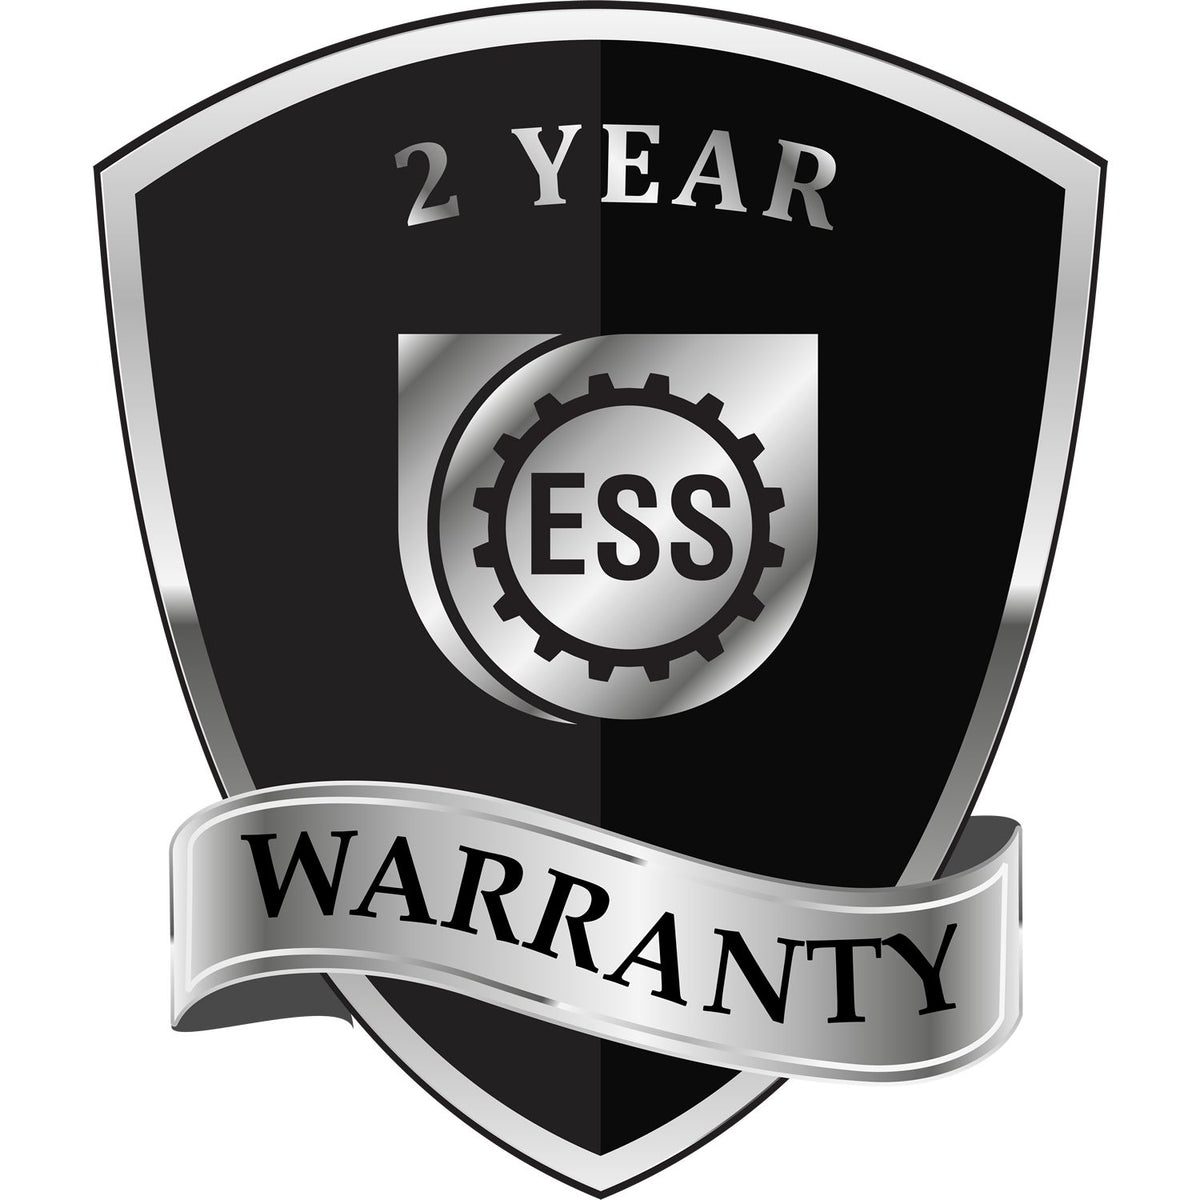 A badge or emblem showing a warranty icon for the Heavy Duty Cast Iron Alaska Land Surveyor Seal Embosser